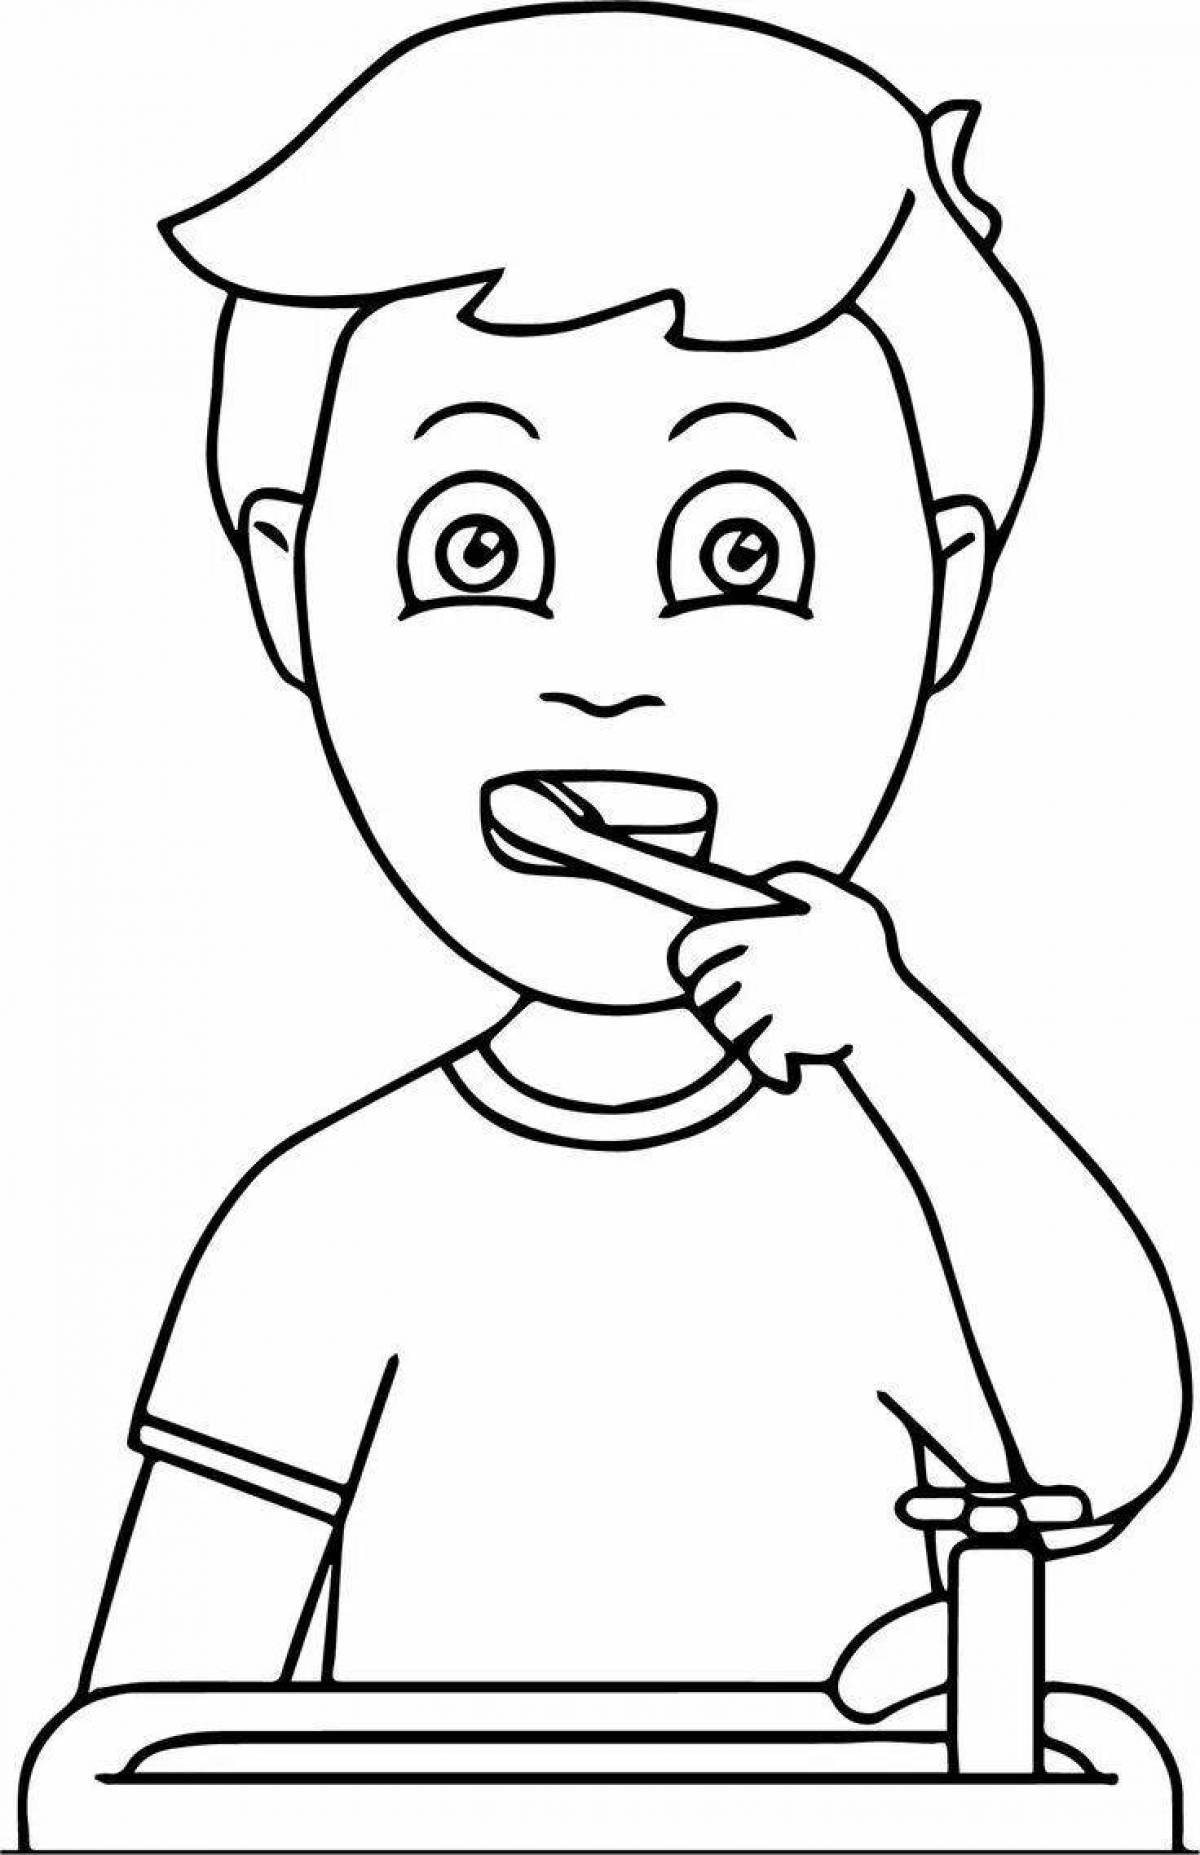 Color-frenzy brush your teeth coloring book